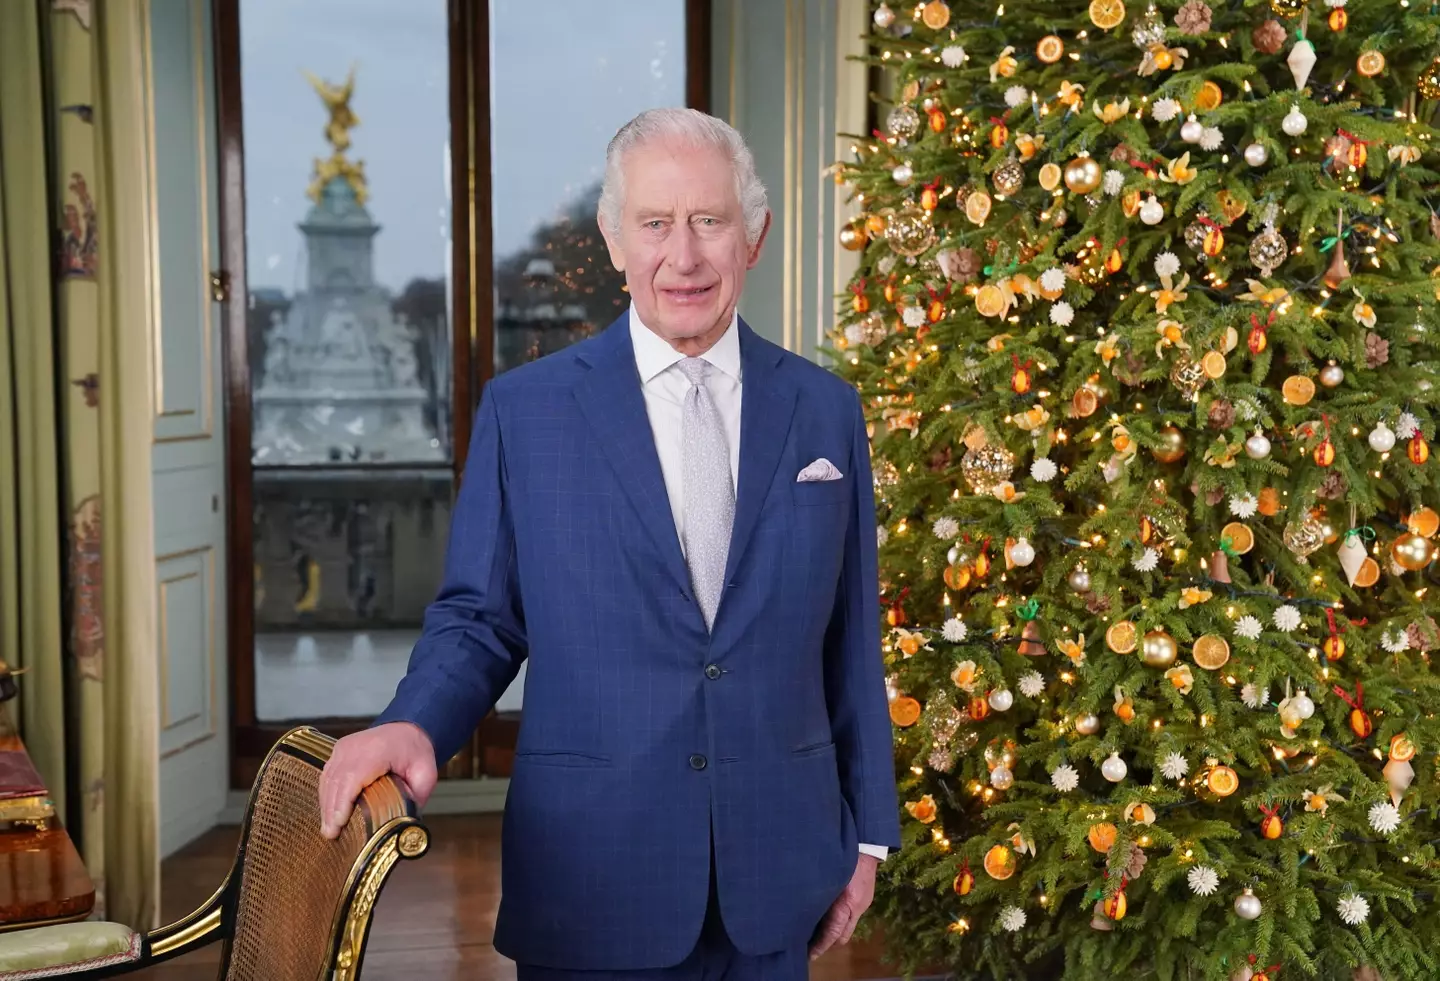 The King gave his second Christmas speech.